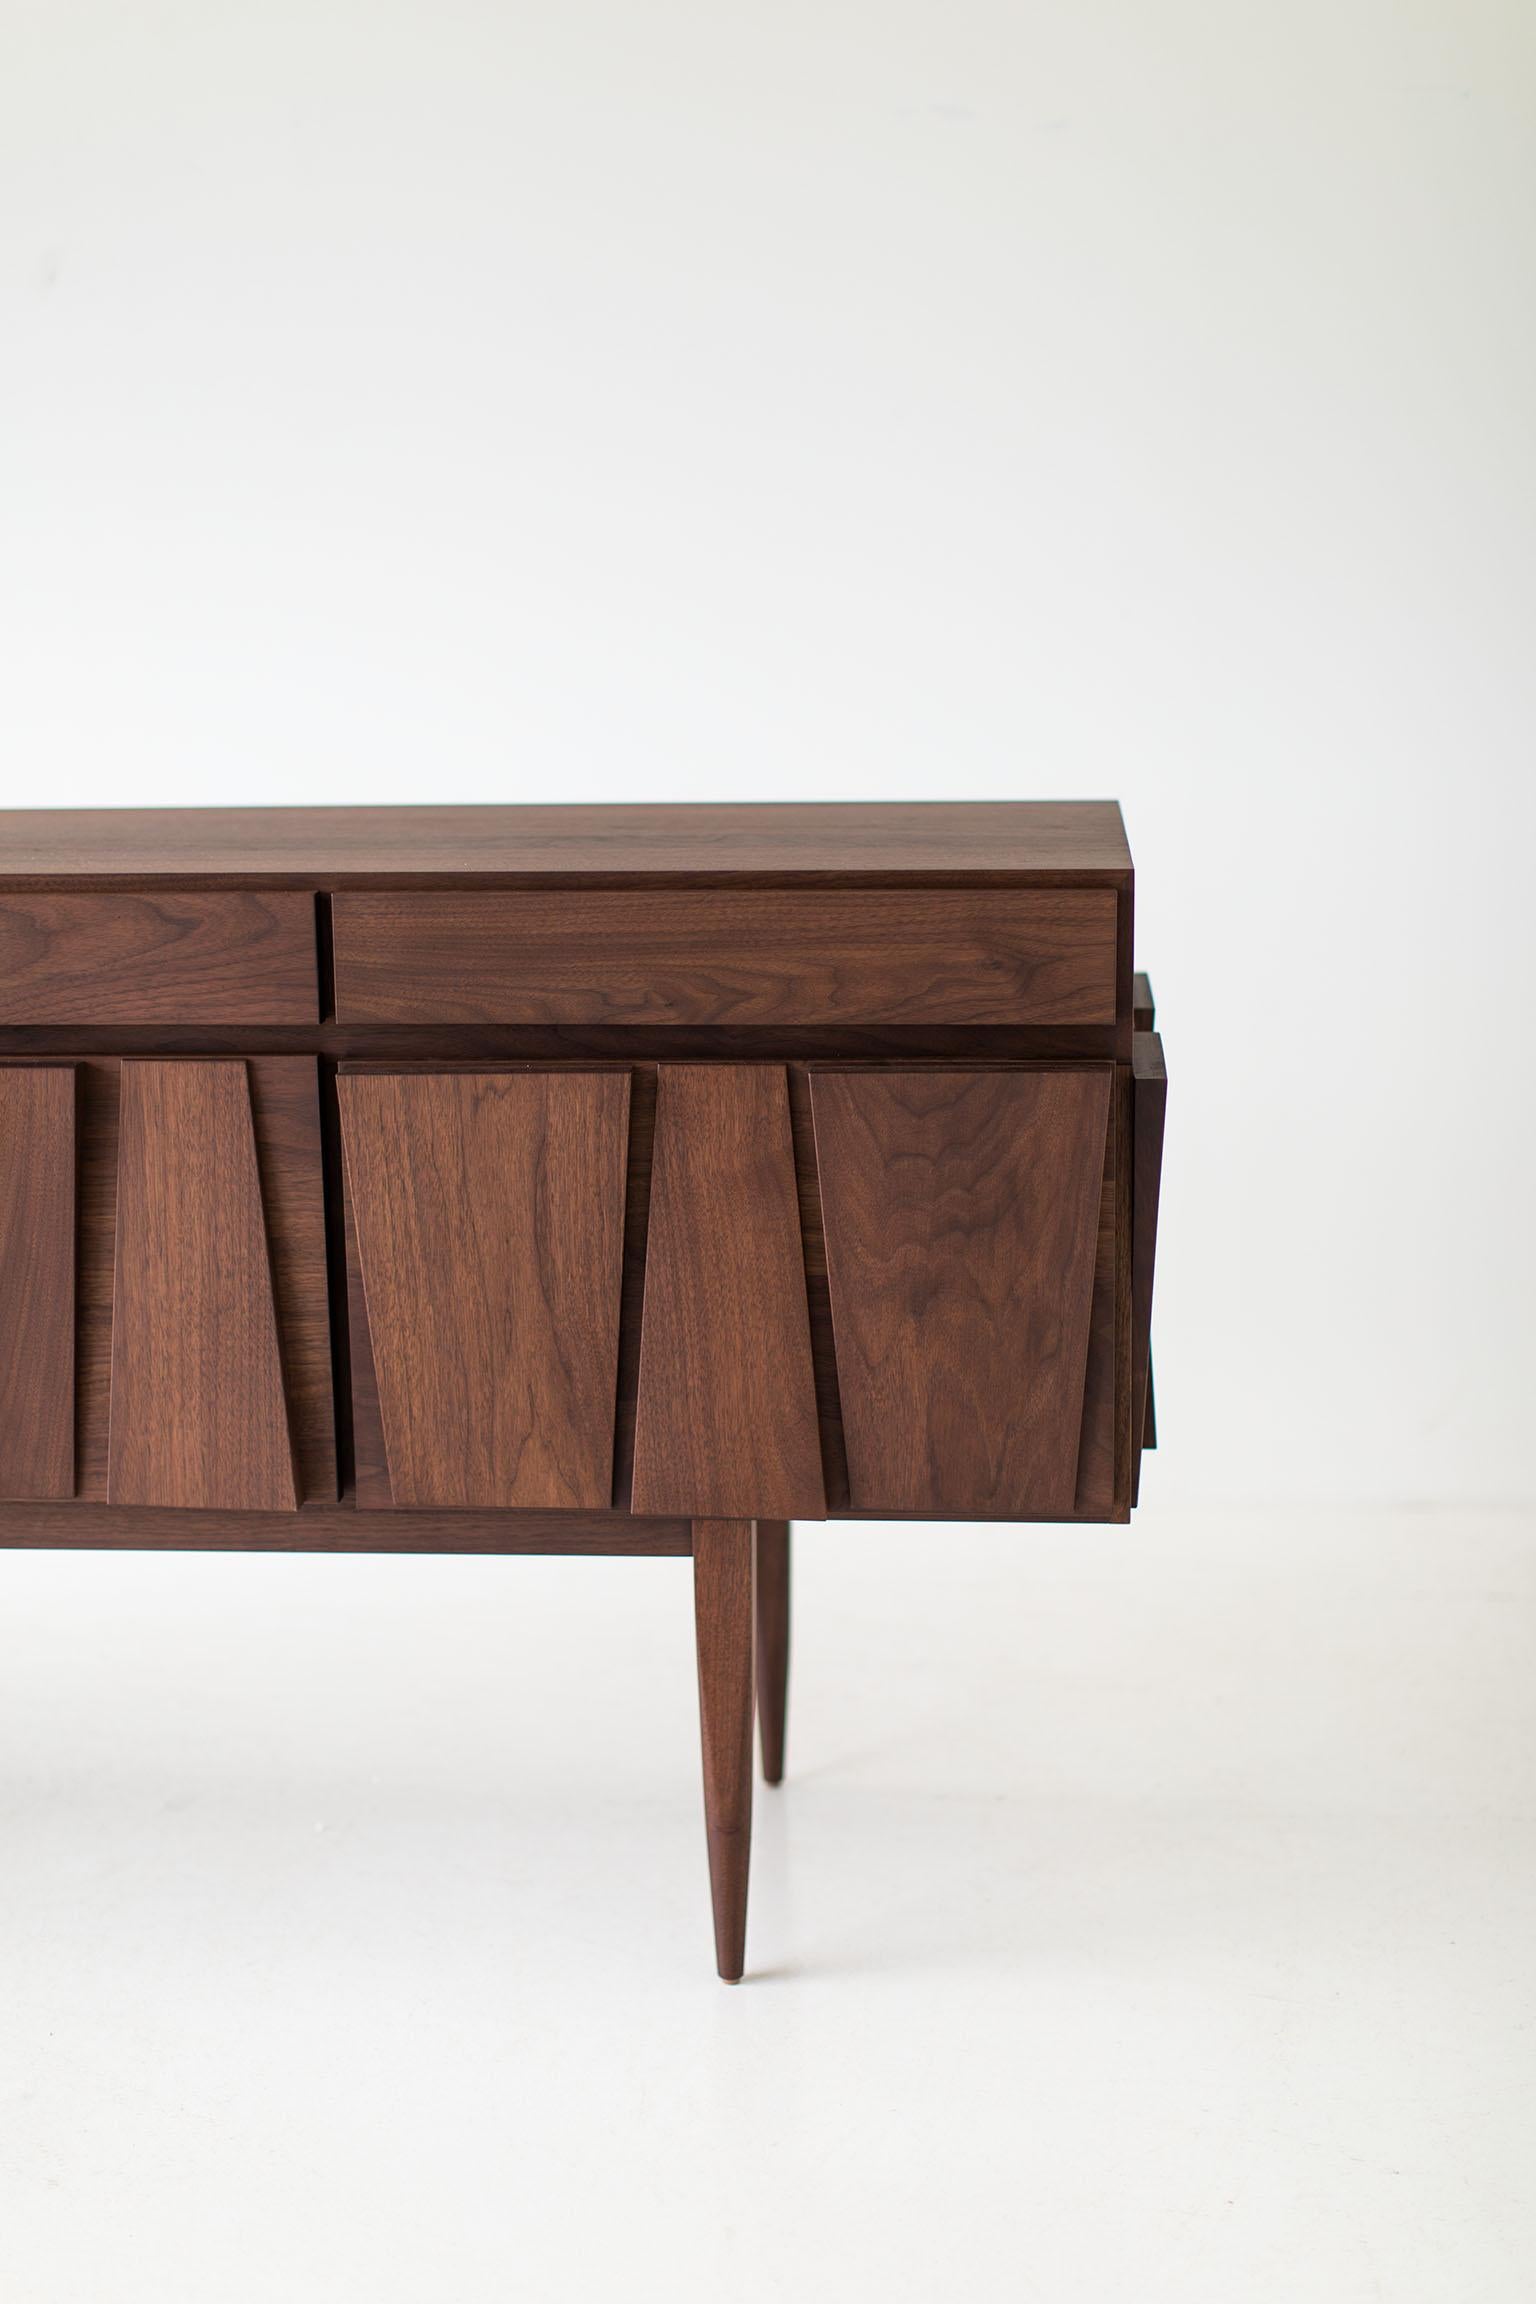 Contemporary Modern Credenza in Walnut by Laura Trenchard For Sale